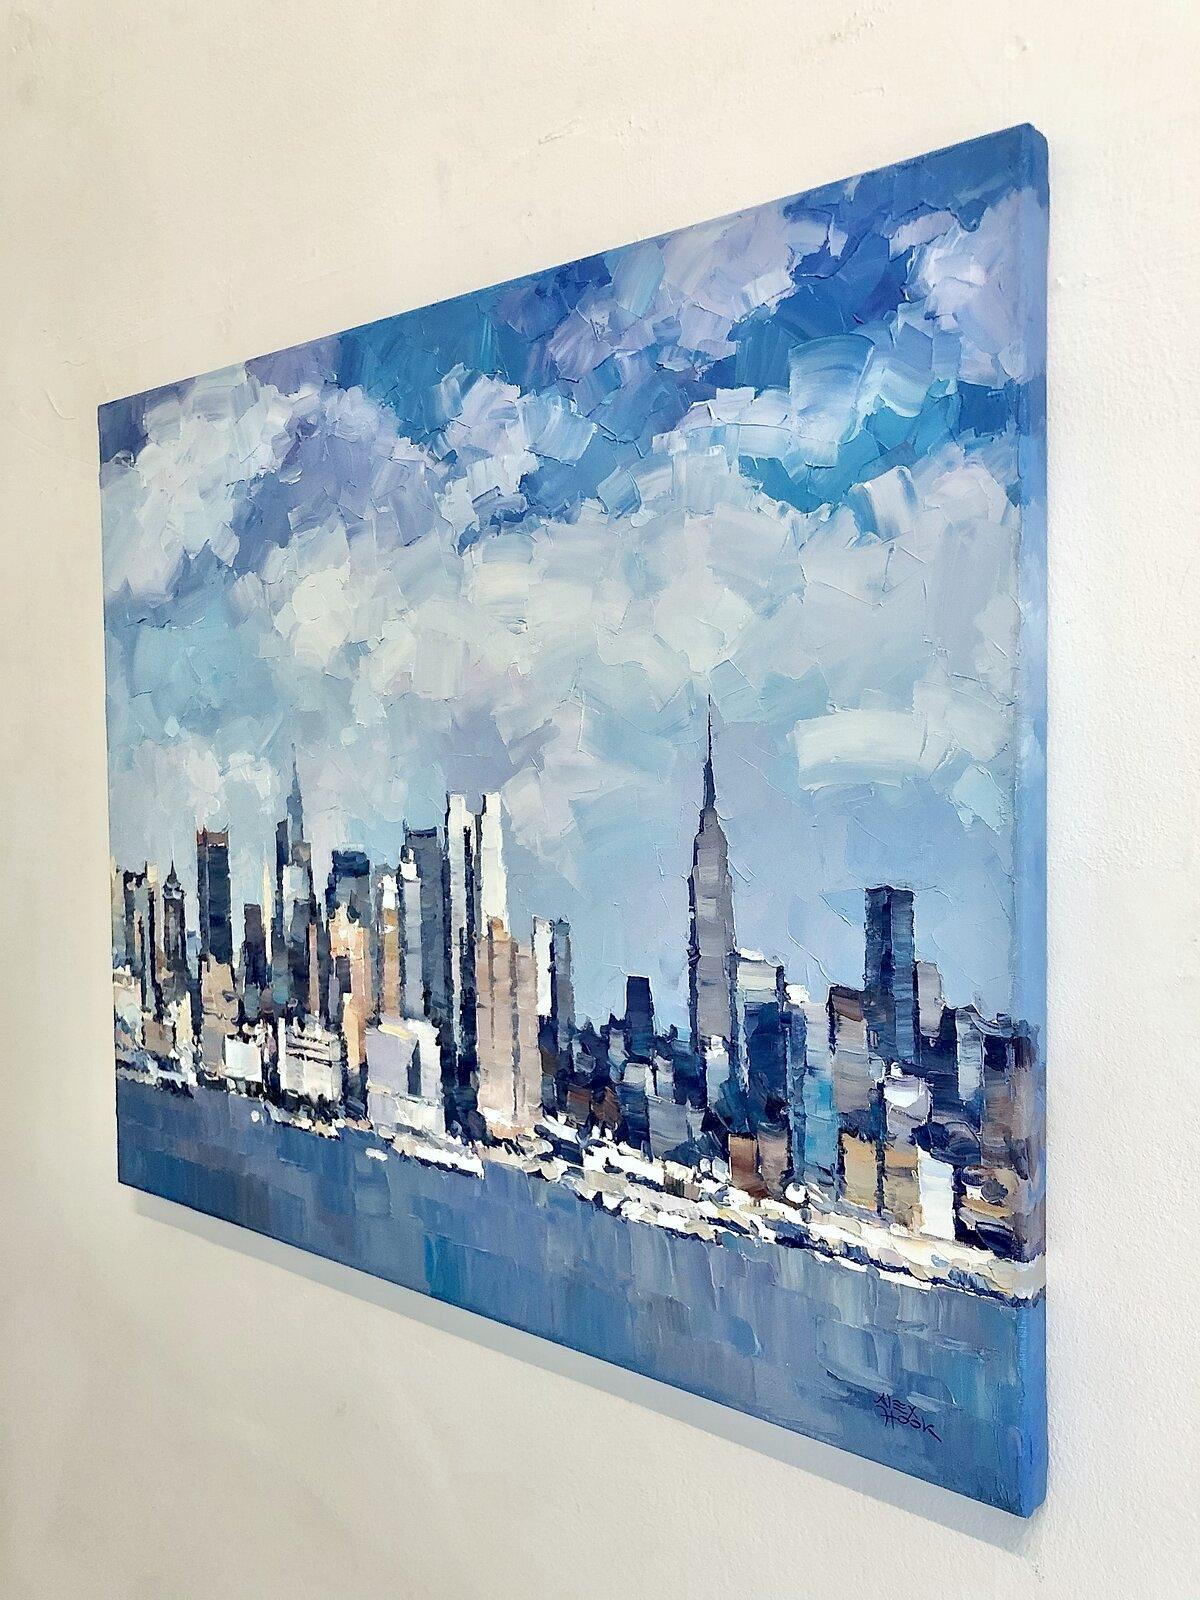 Clear Skies, NYC-Original Abstract cityscape-landscape painting-contemporary Art - Painting by Alex Hook Krioutchkov